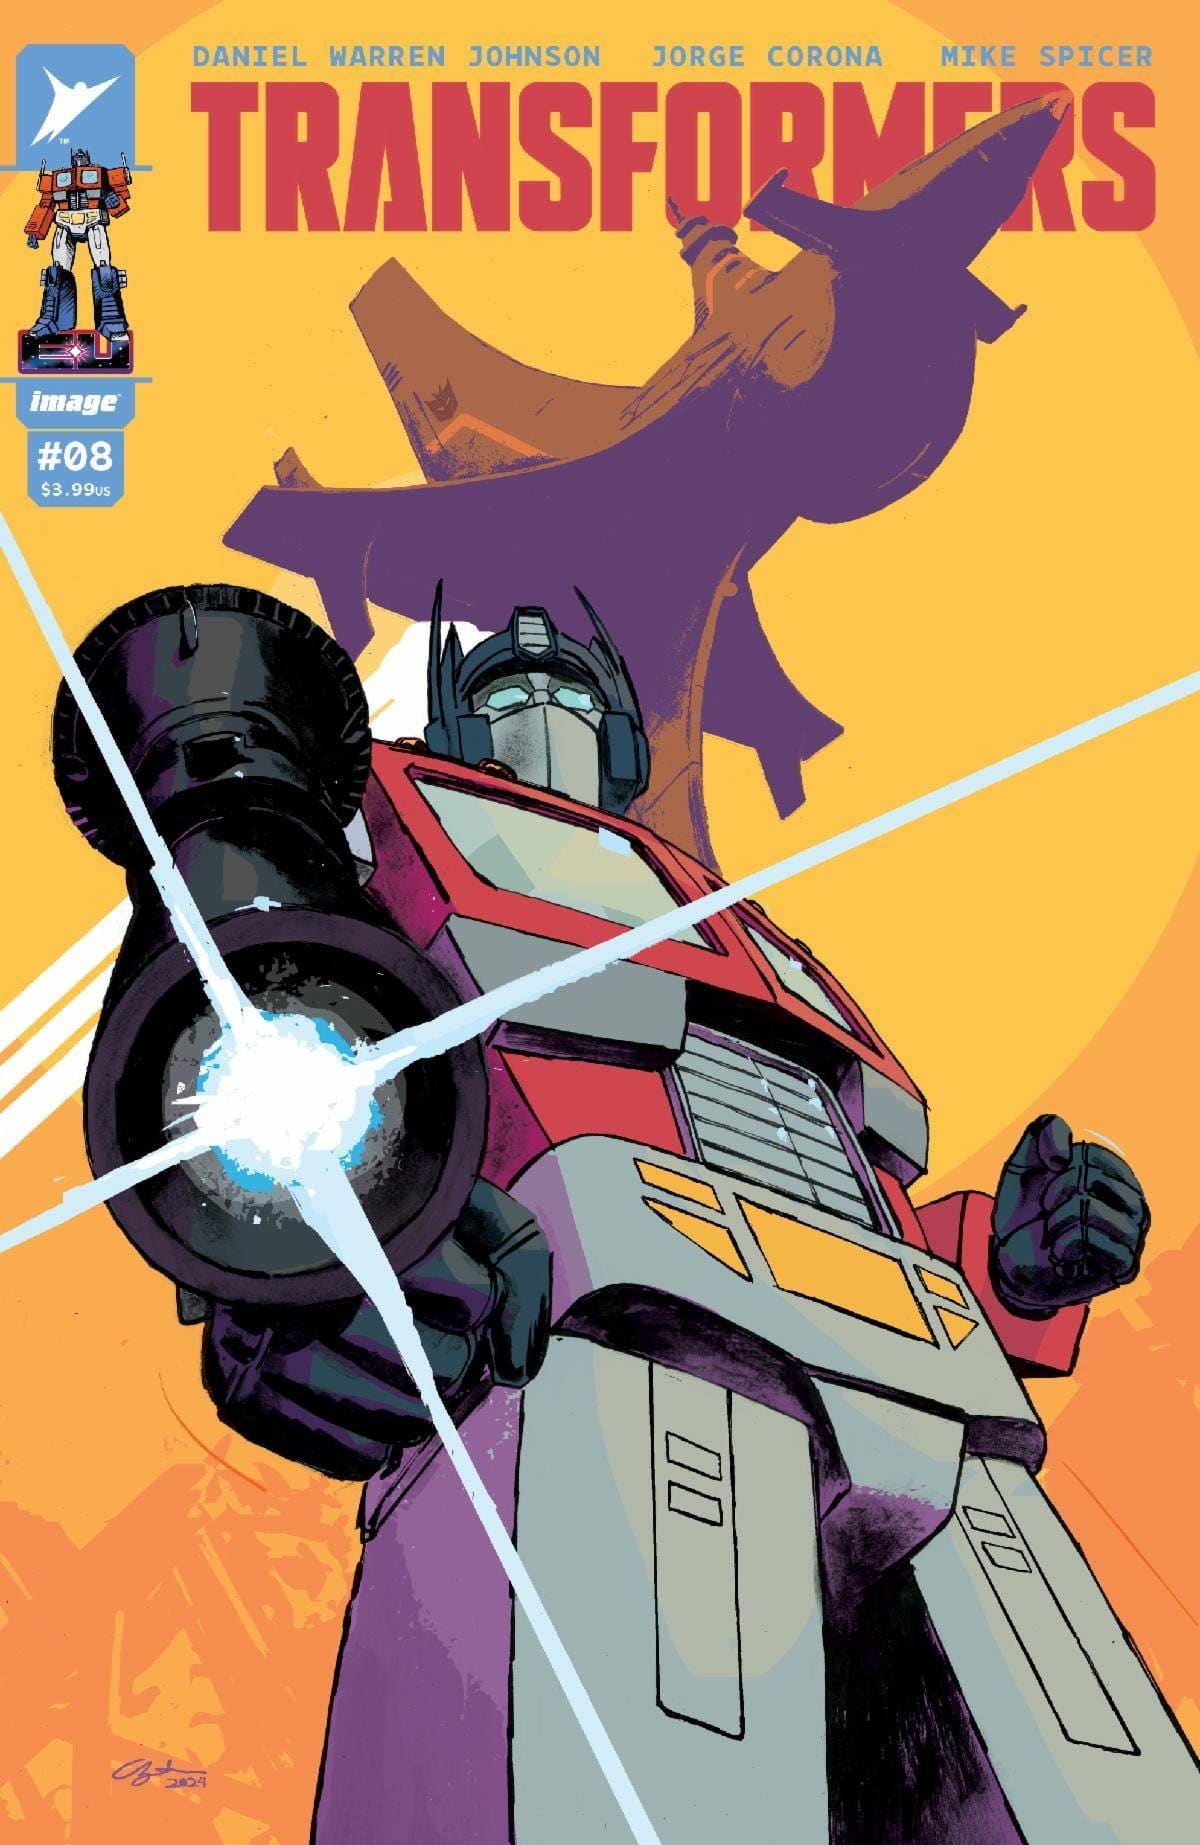 TRANSFORMERS #8 - All the Covers Bundle!